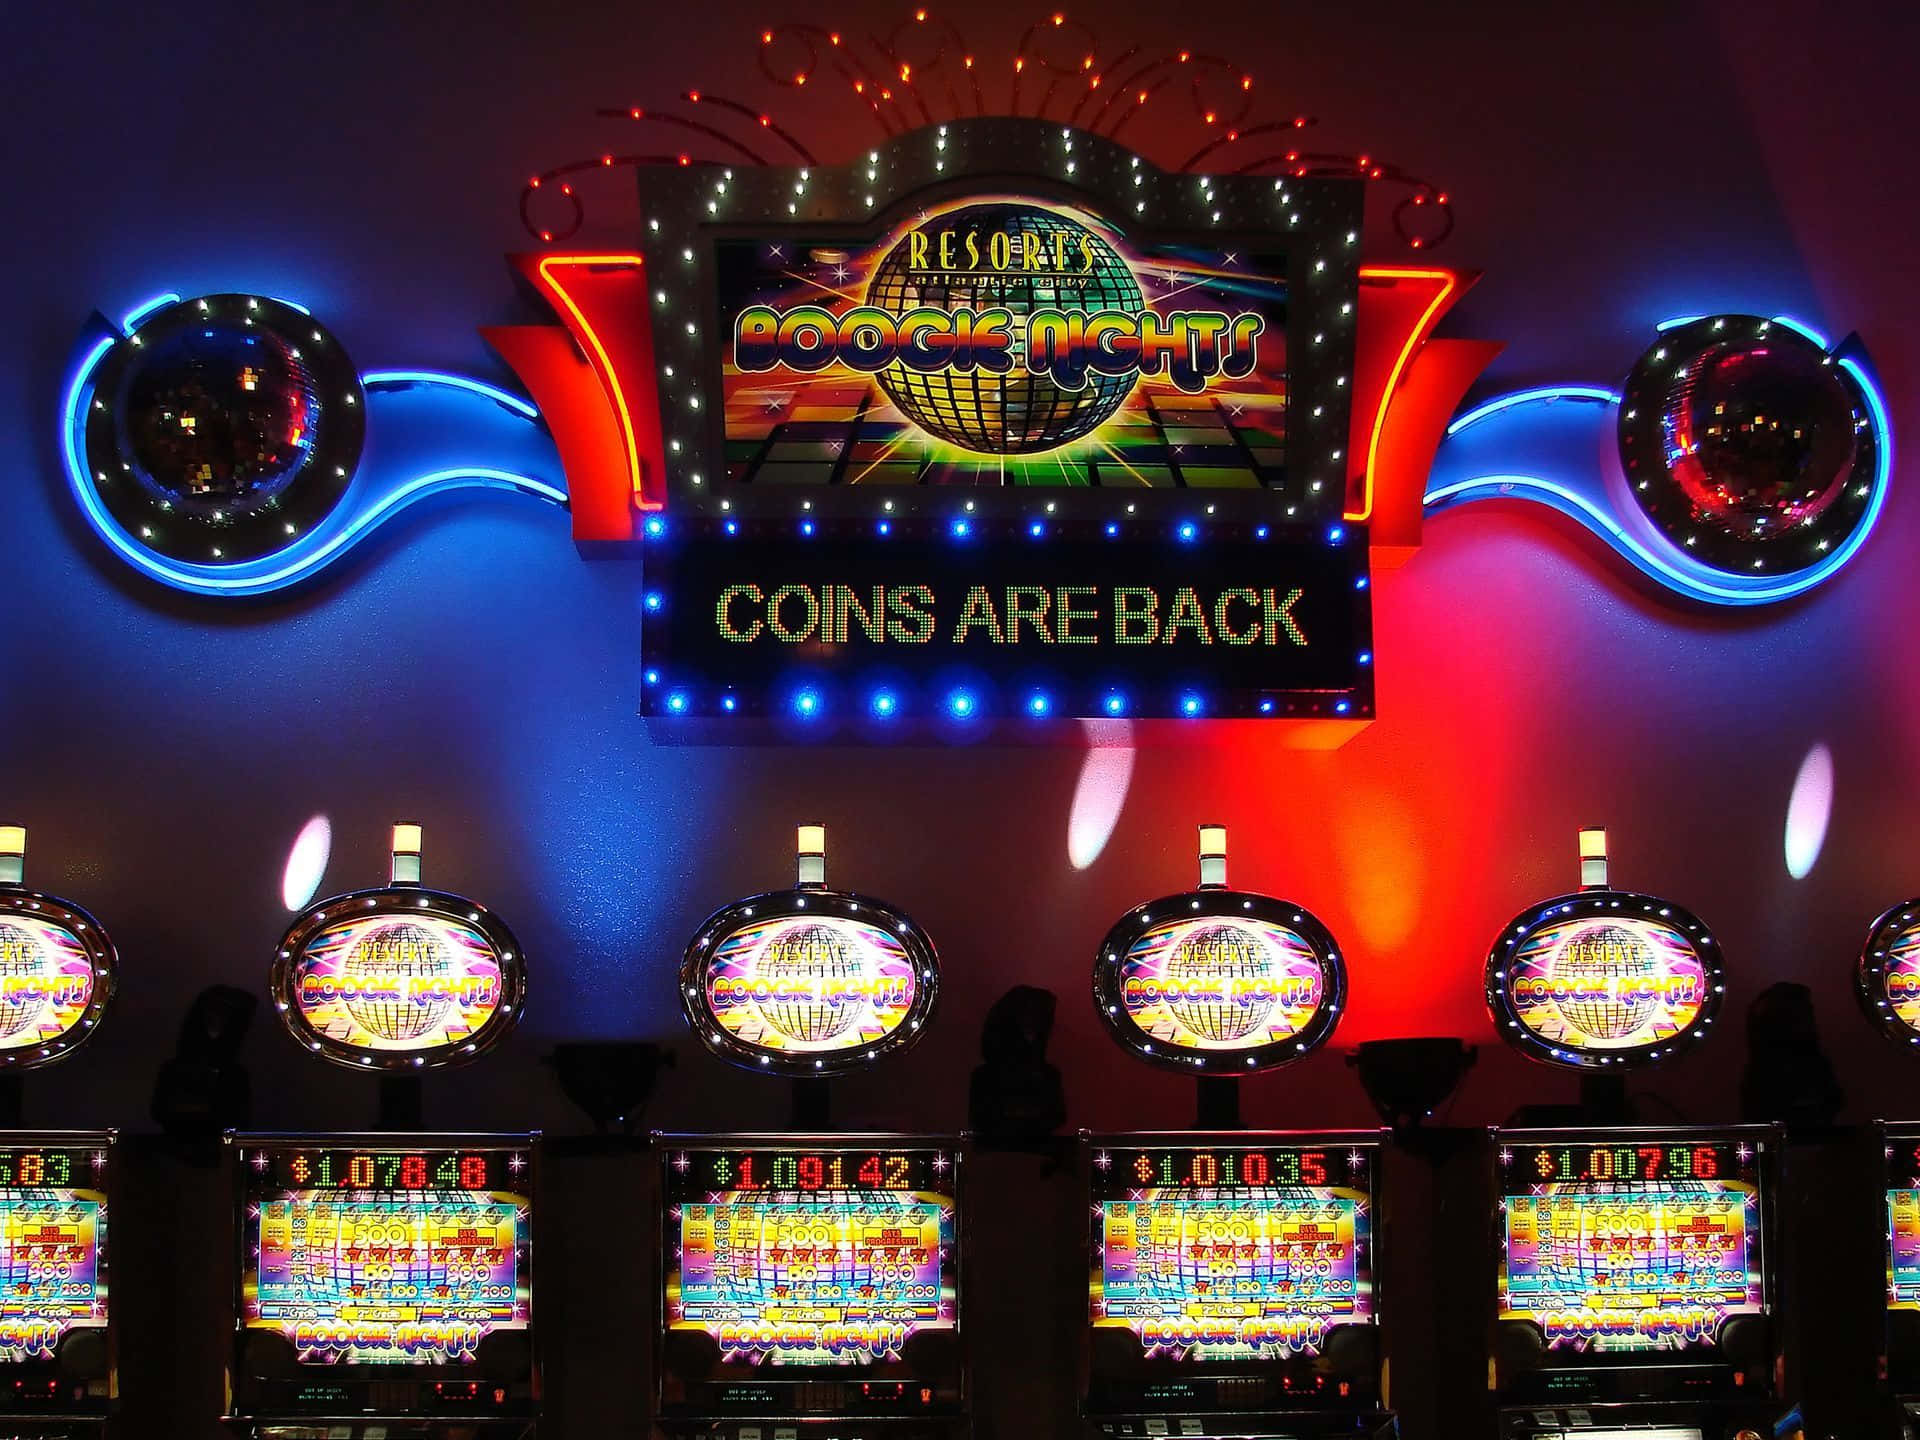 Try your luck with this classic Slot Machine!